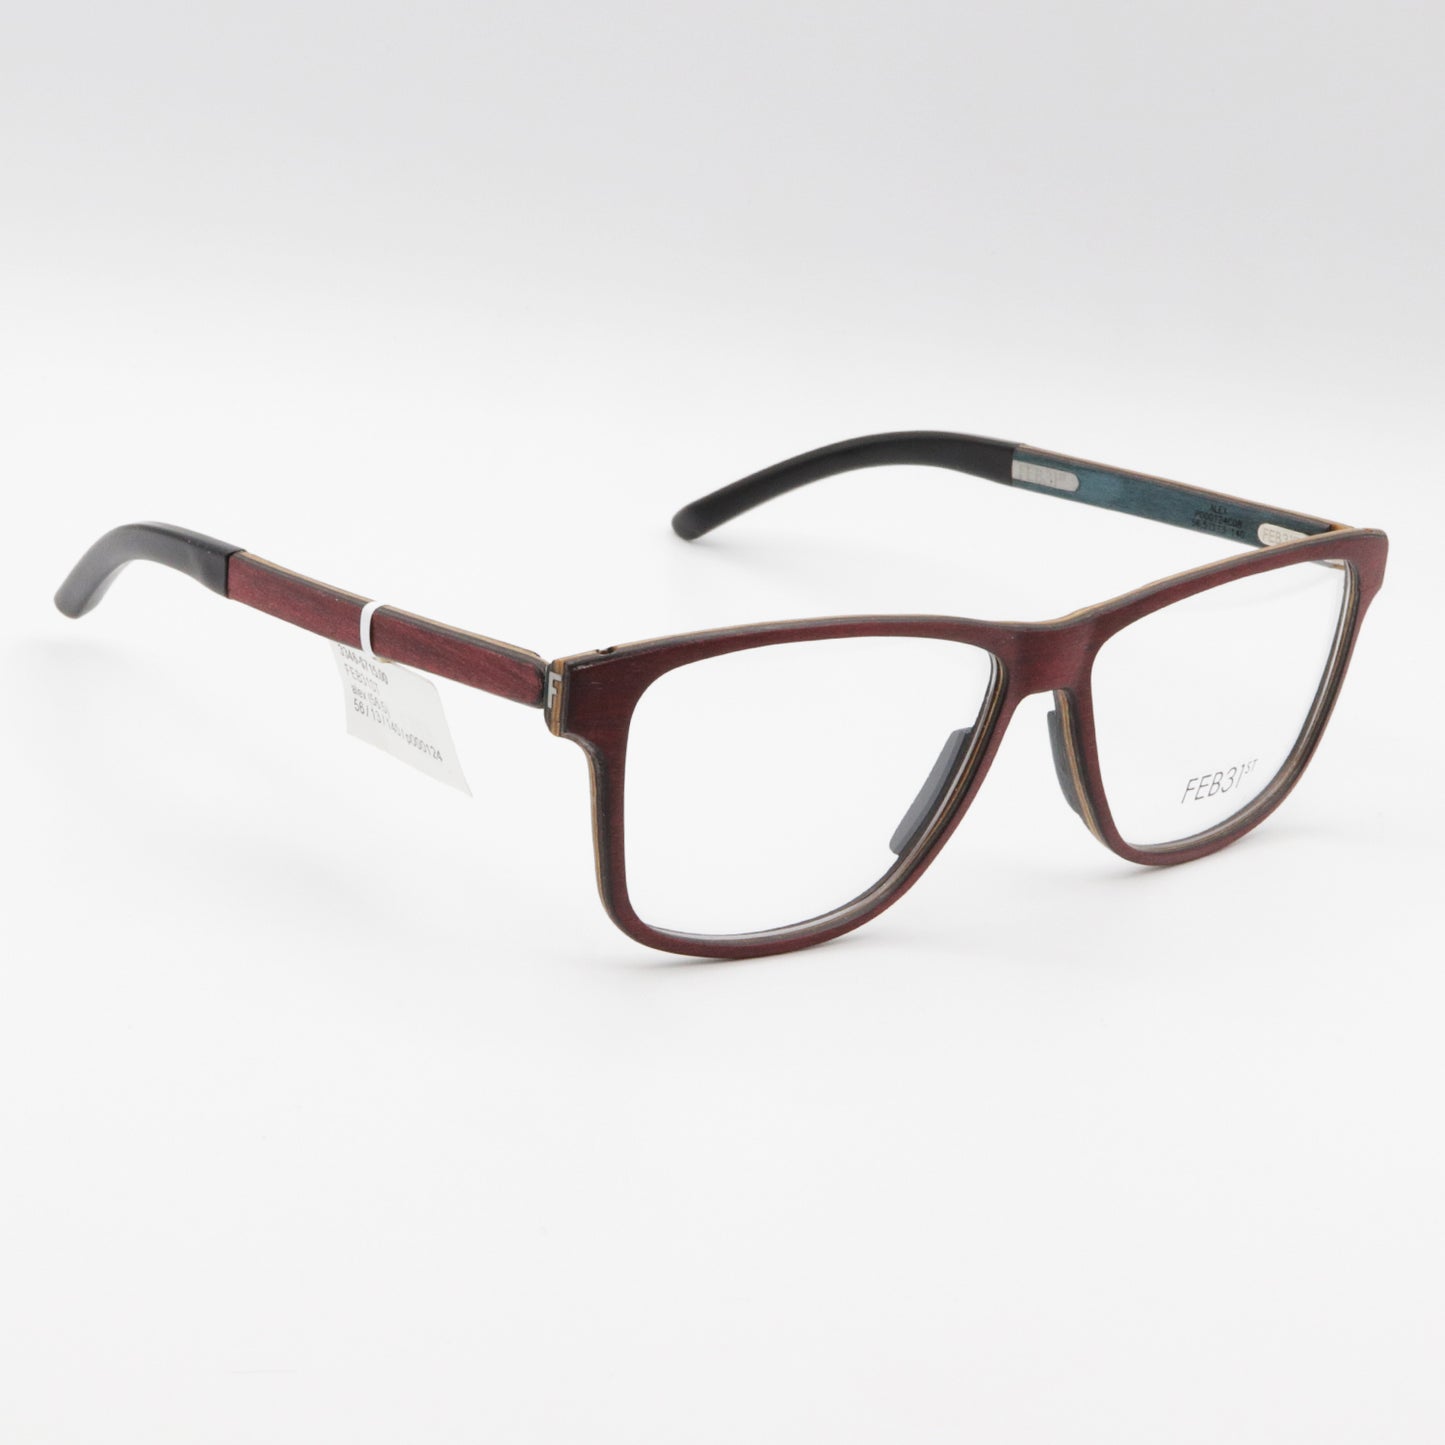 Alex by FEB31st wooden glasses Burgundy and Green